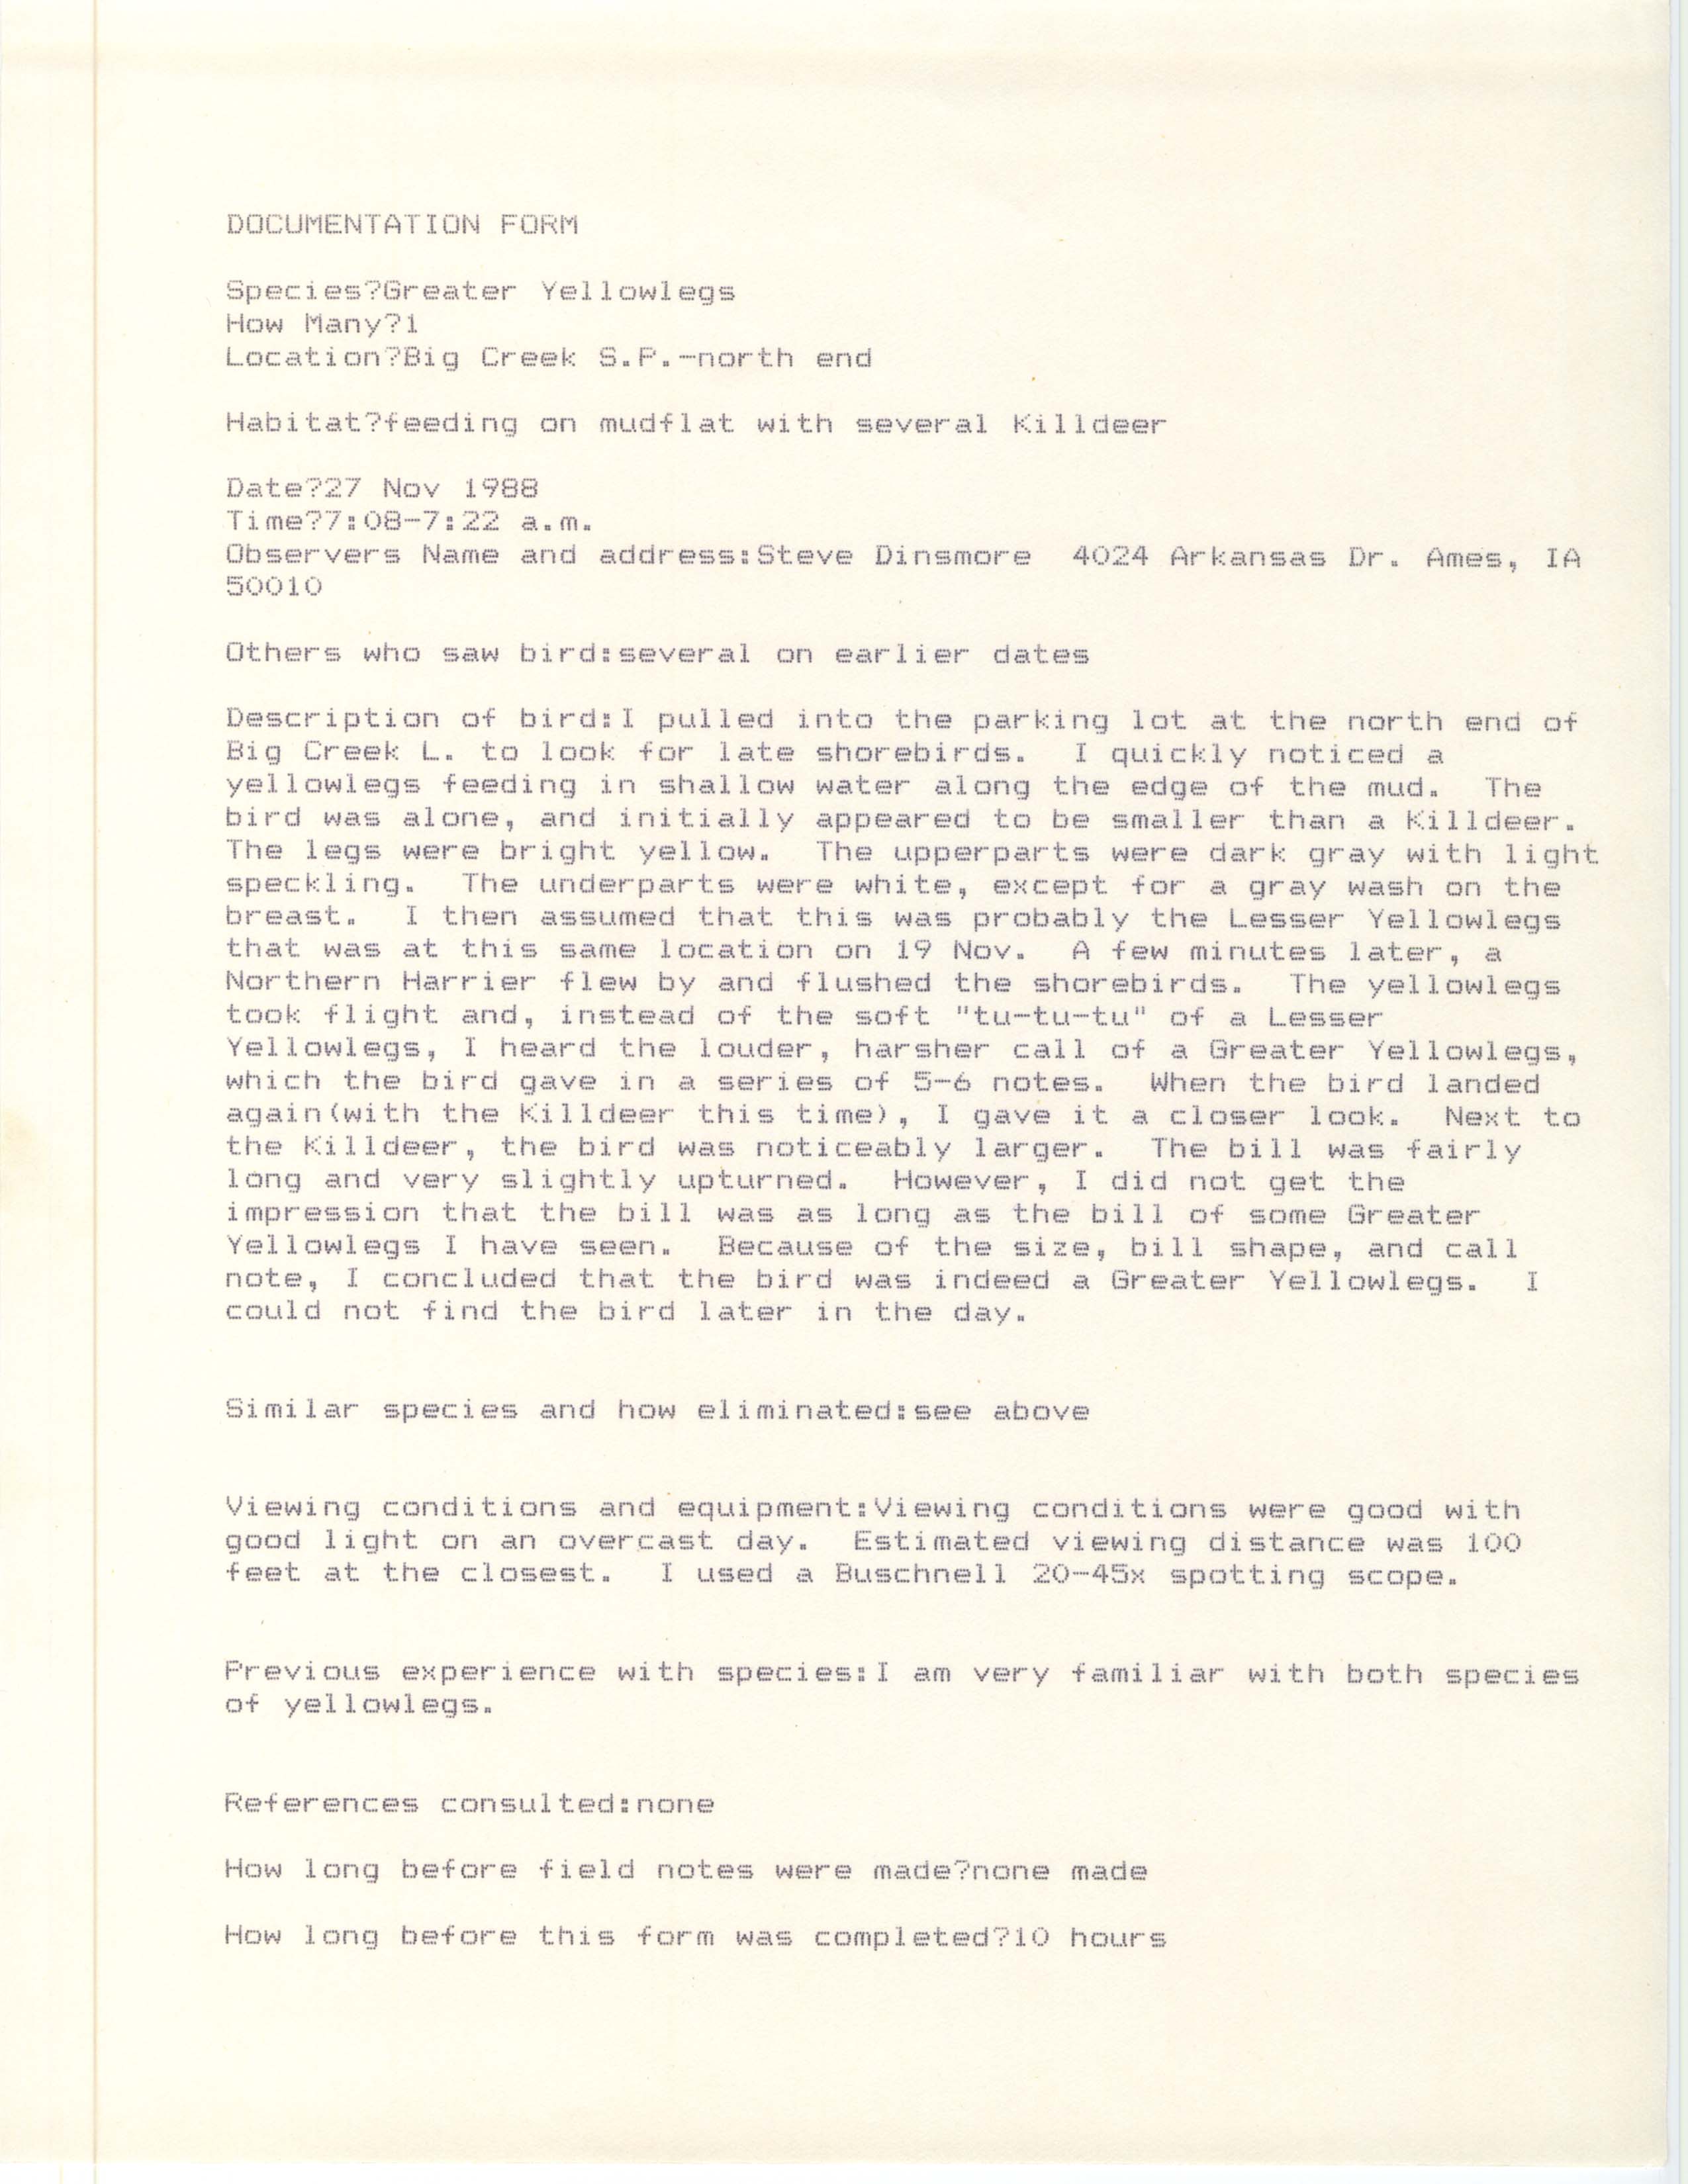 Rare bird documentation form for Greater Yellowlegs at Big Creek State Park, 1988